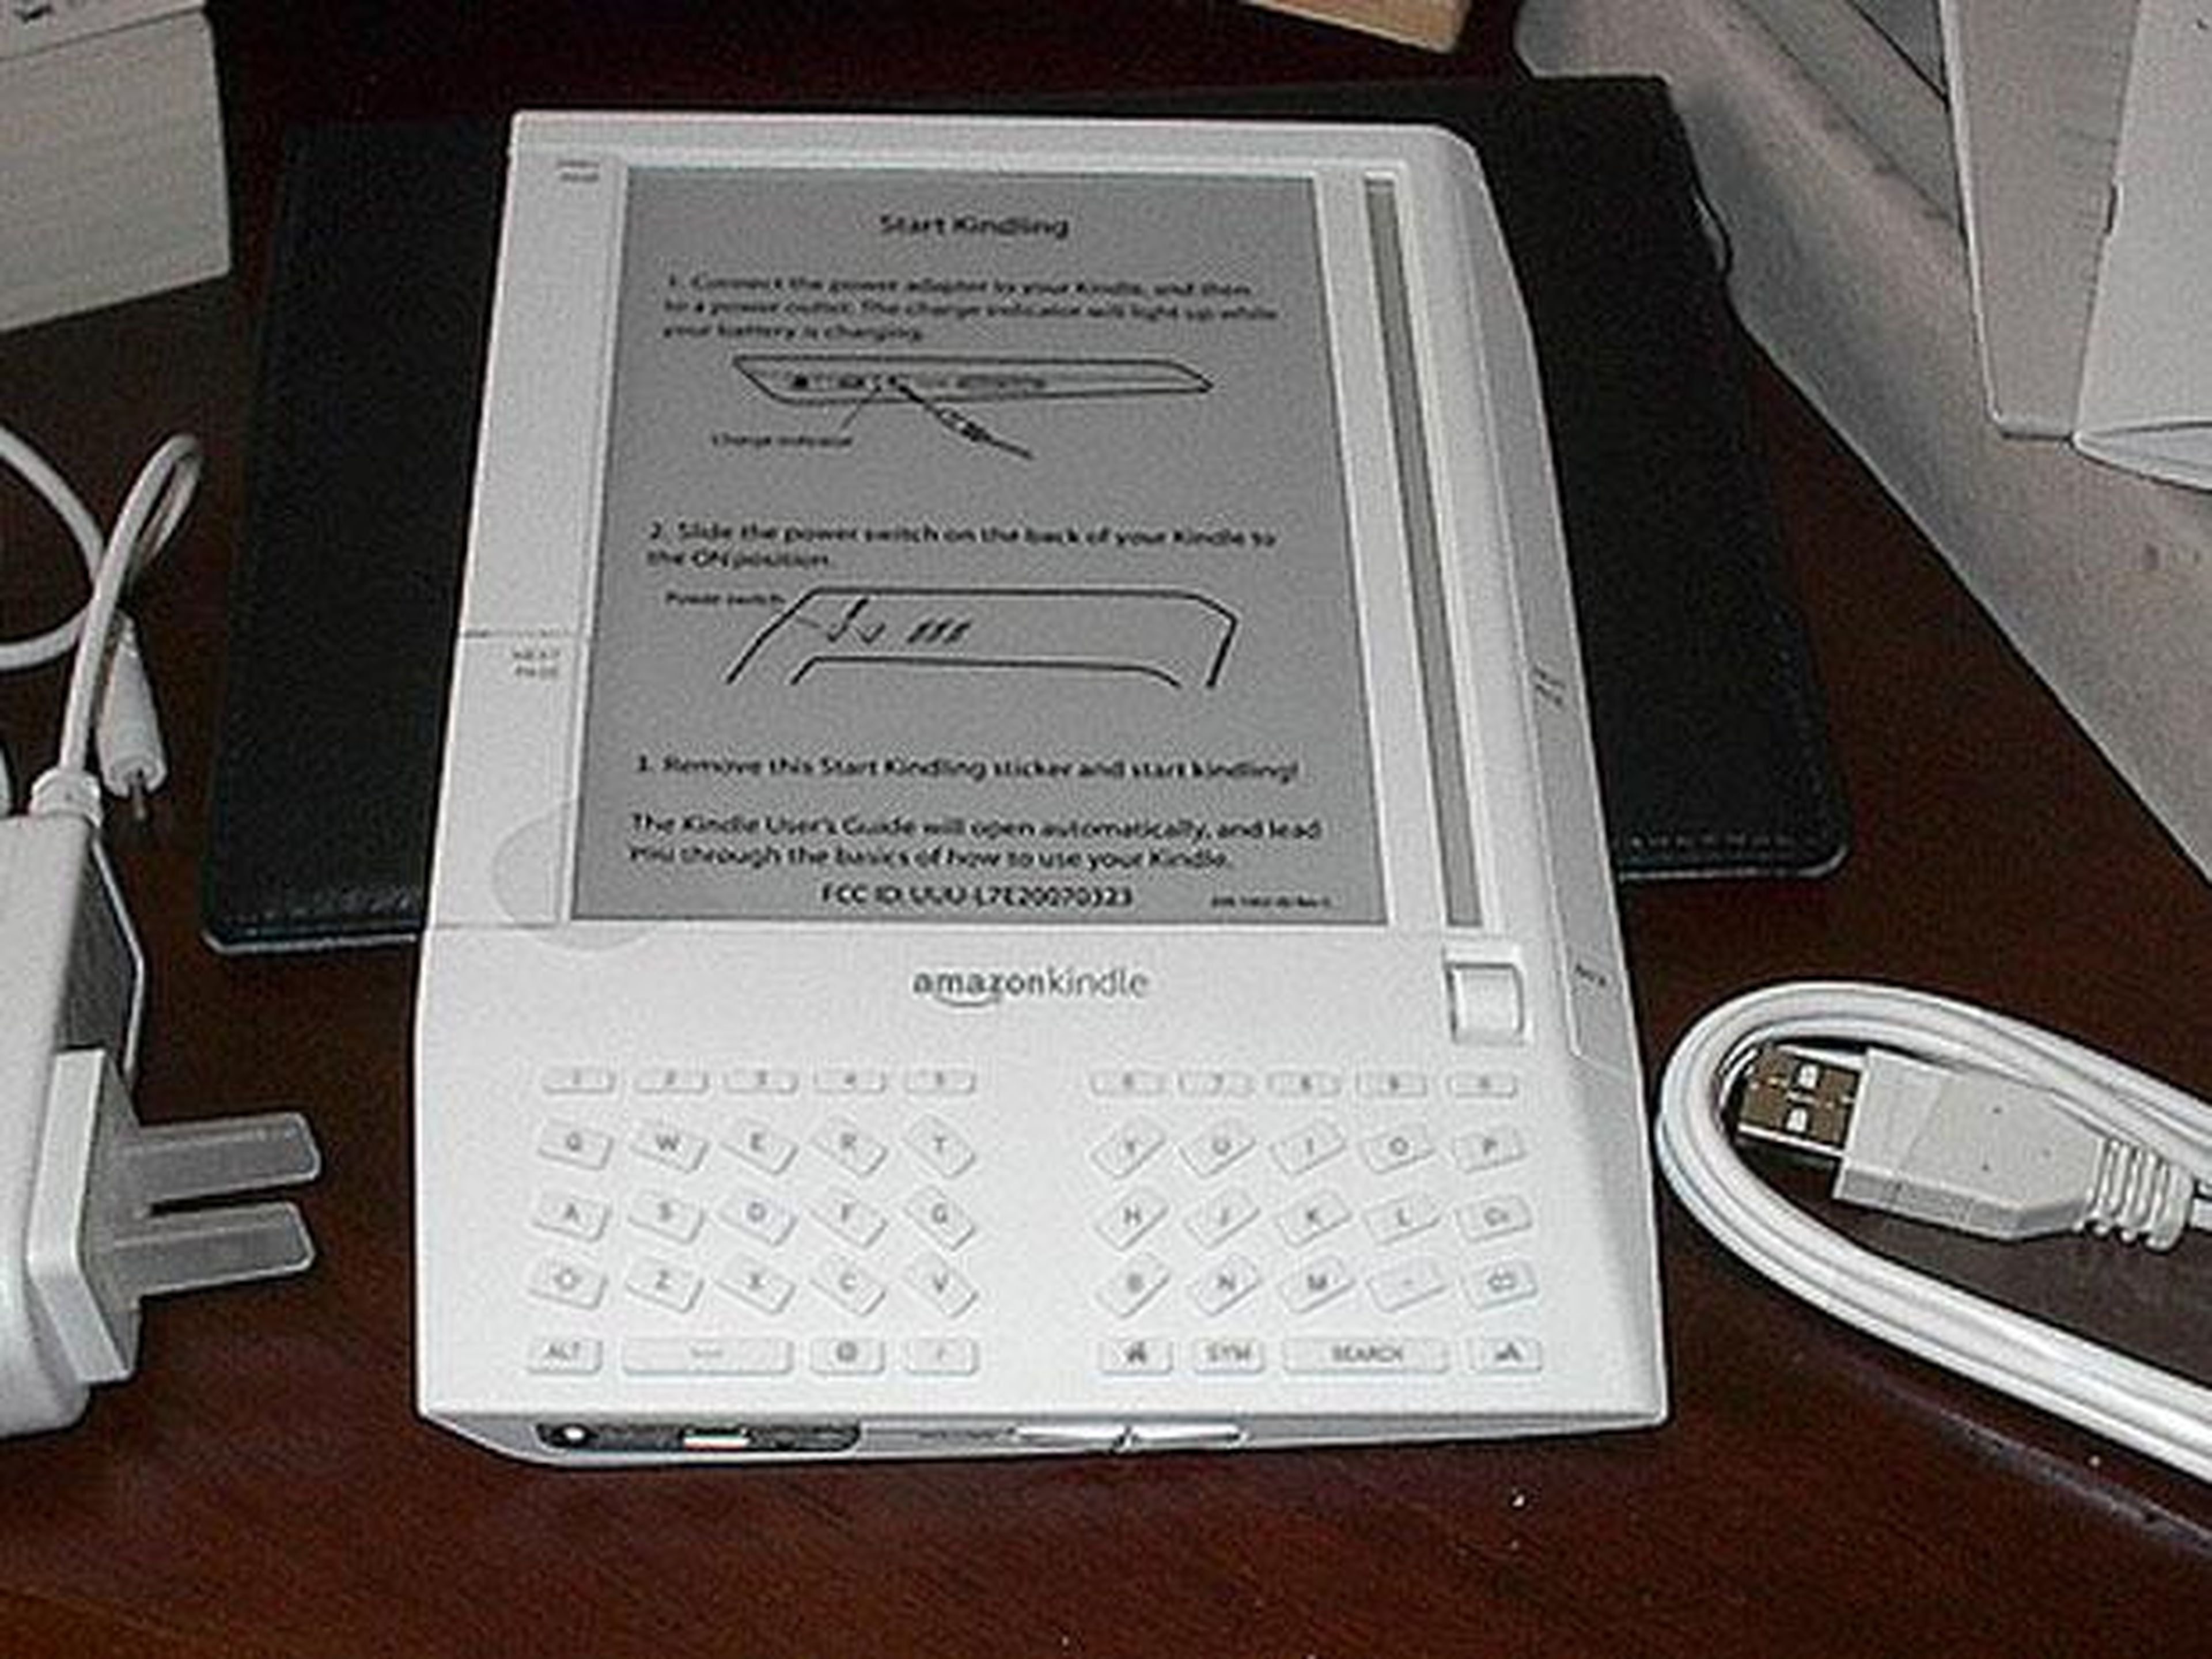 Amazon's Kindle was released in 2007. It came only in white and had an E-Ink display that made reading easy on the eyes.